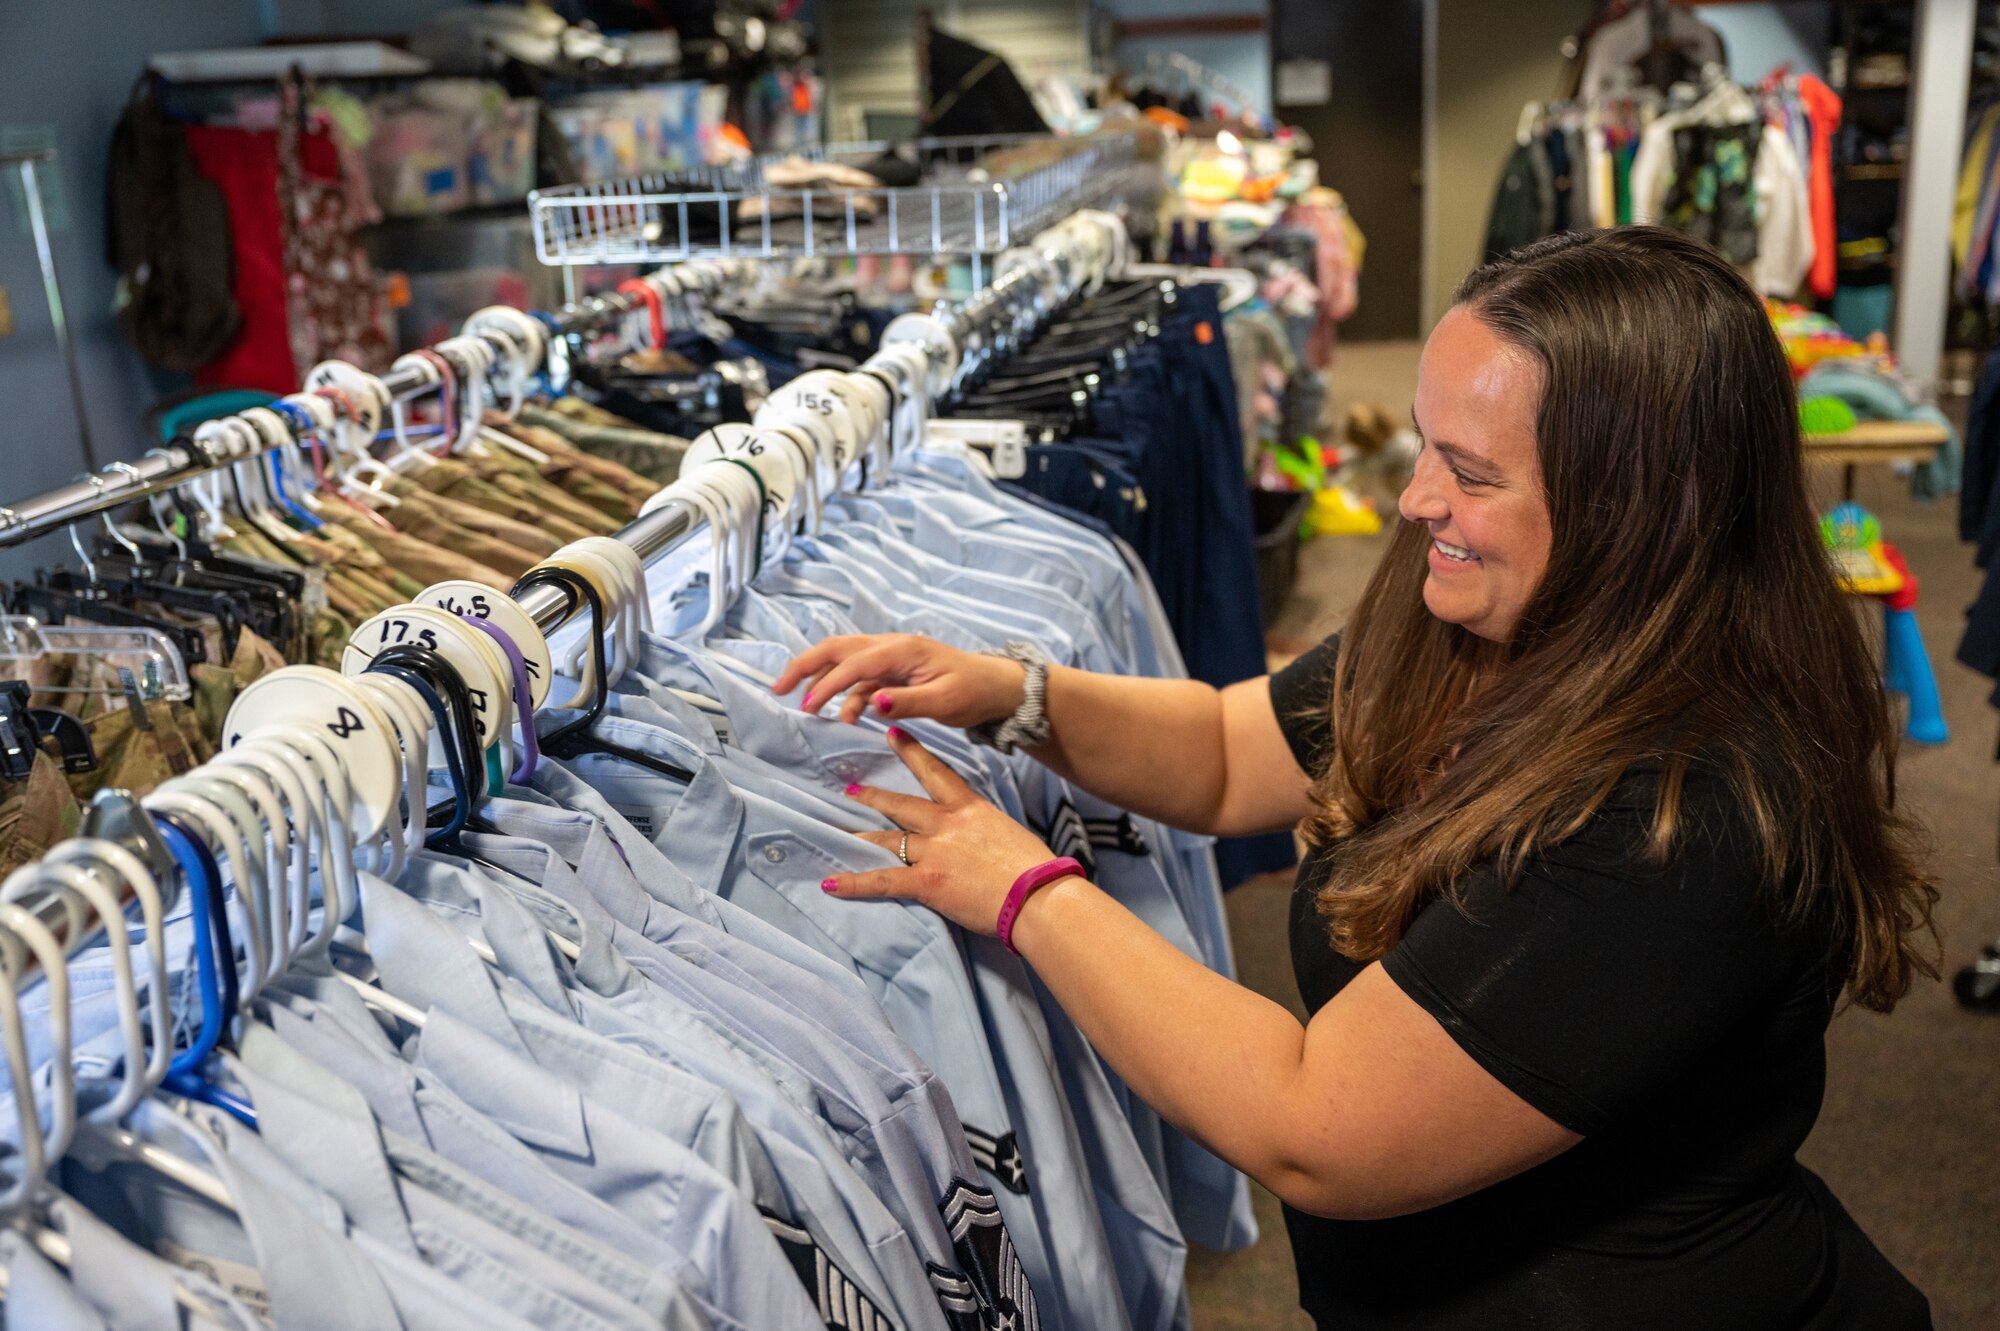 Andrea Sierra organizes uniforms at the Airman’s Attic on Dover Air Force Base, Del., April 6, 2022. A military spouse for eight years, Sierra is a member of the Dover Spouse’s Club and plays an active role in the community. (U.S. Air Force photo by Airman 1st Class Cydney Lee)